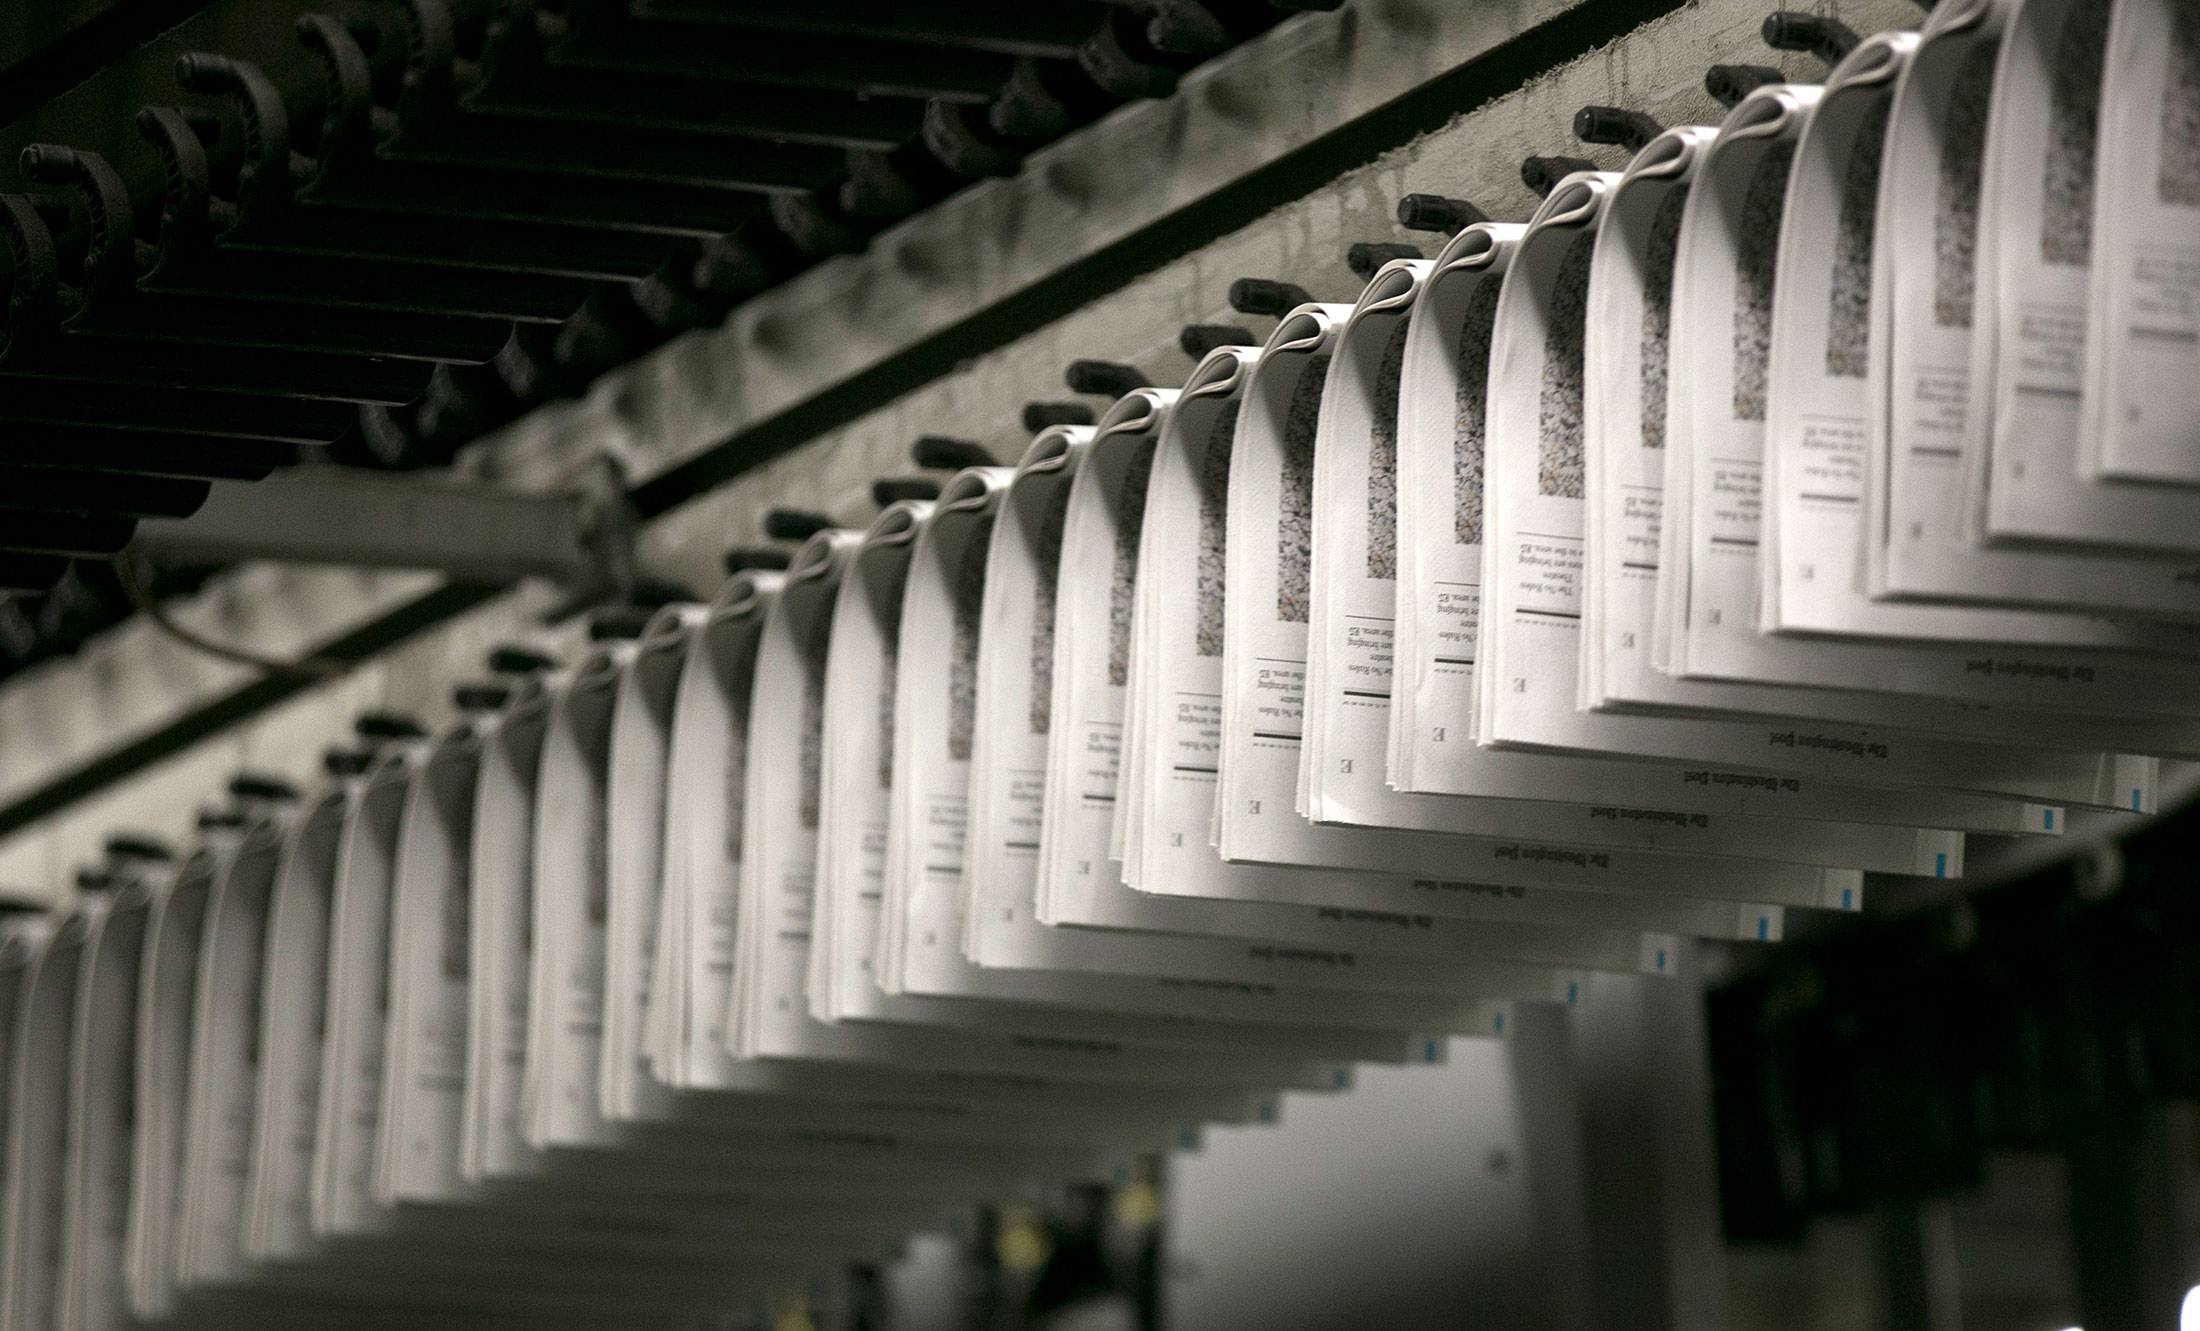 Sections of the Washington Post travel on a conveyor at the newspaper production facility in Springfield, Virginia, U.S., on Friday, July 12, 2013.
